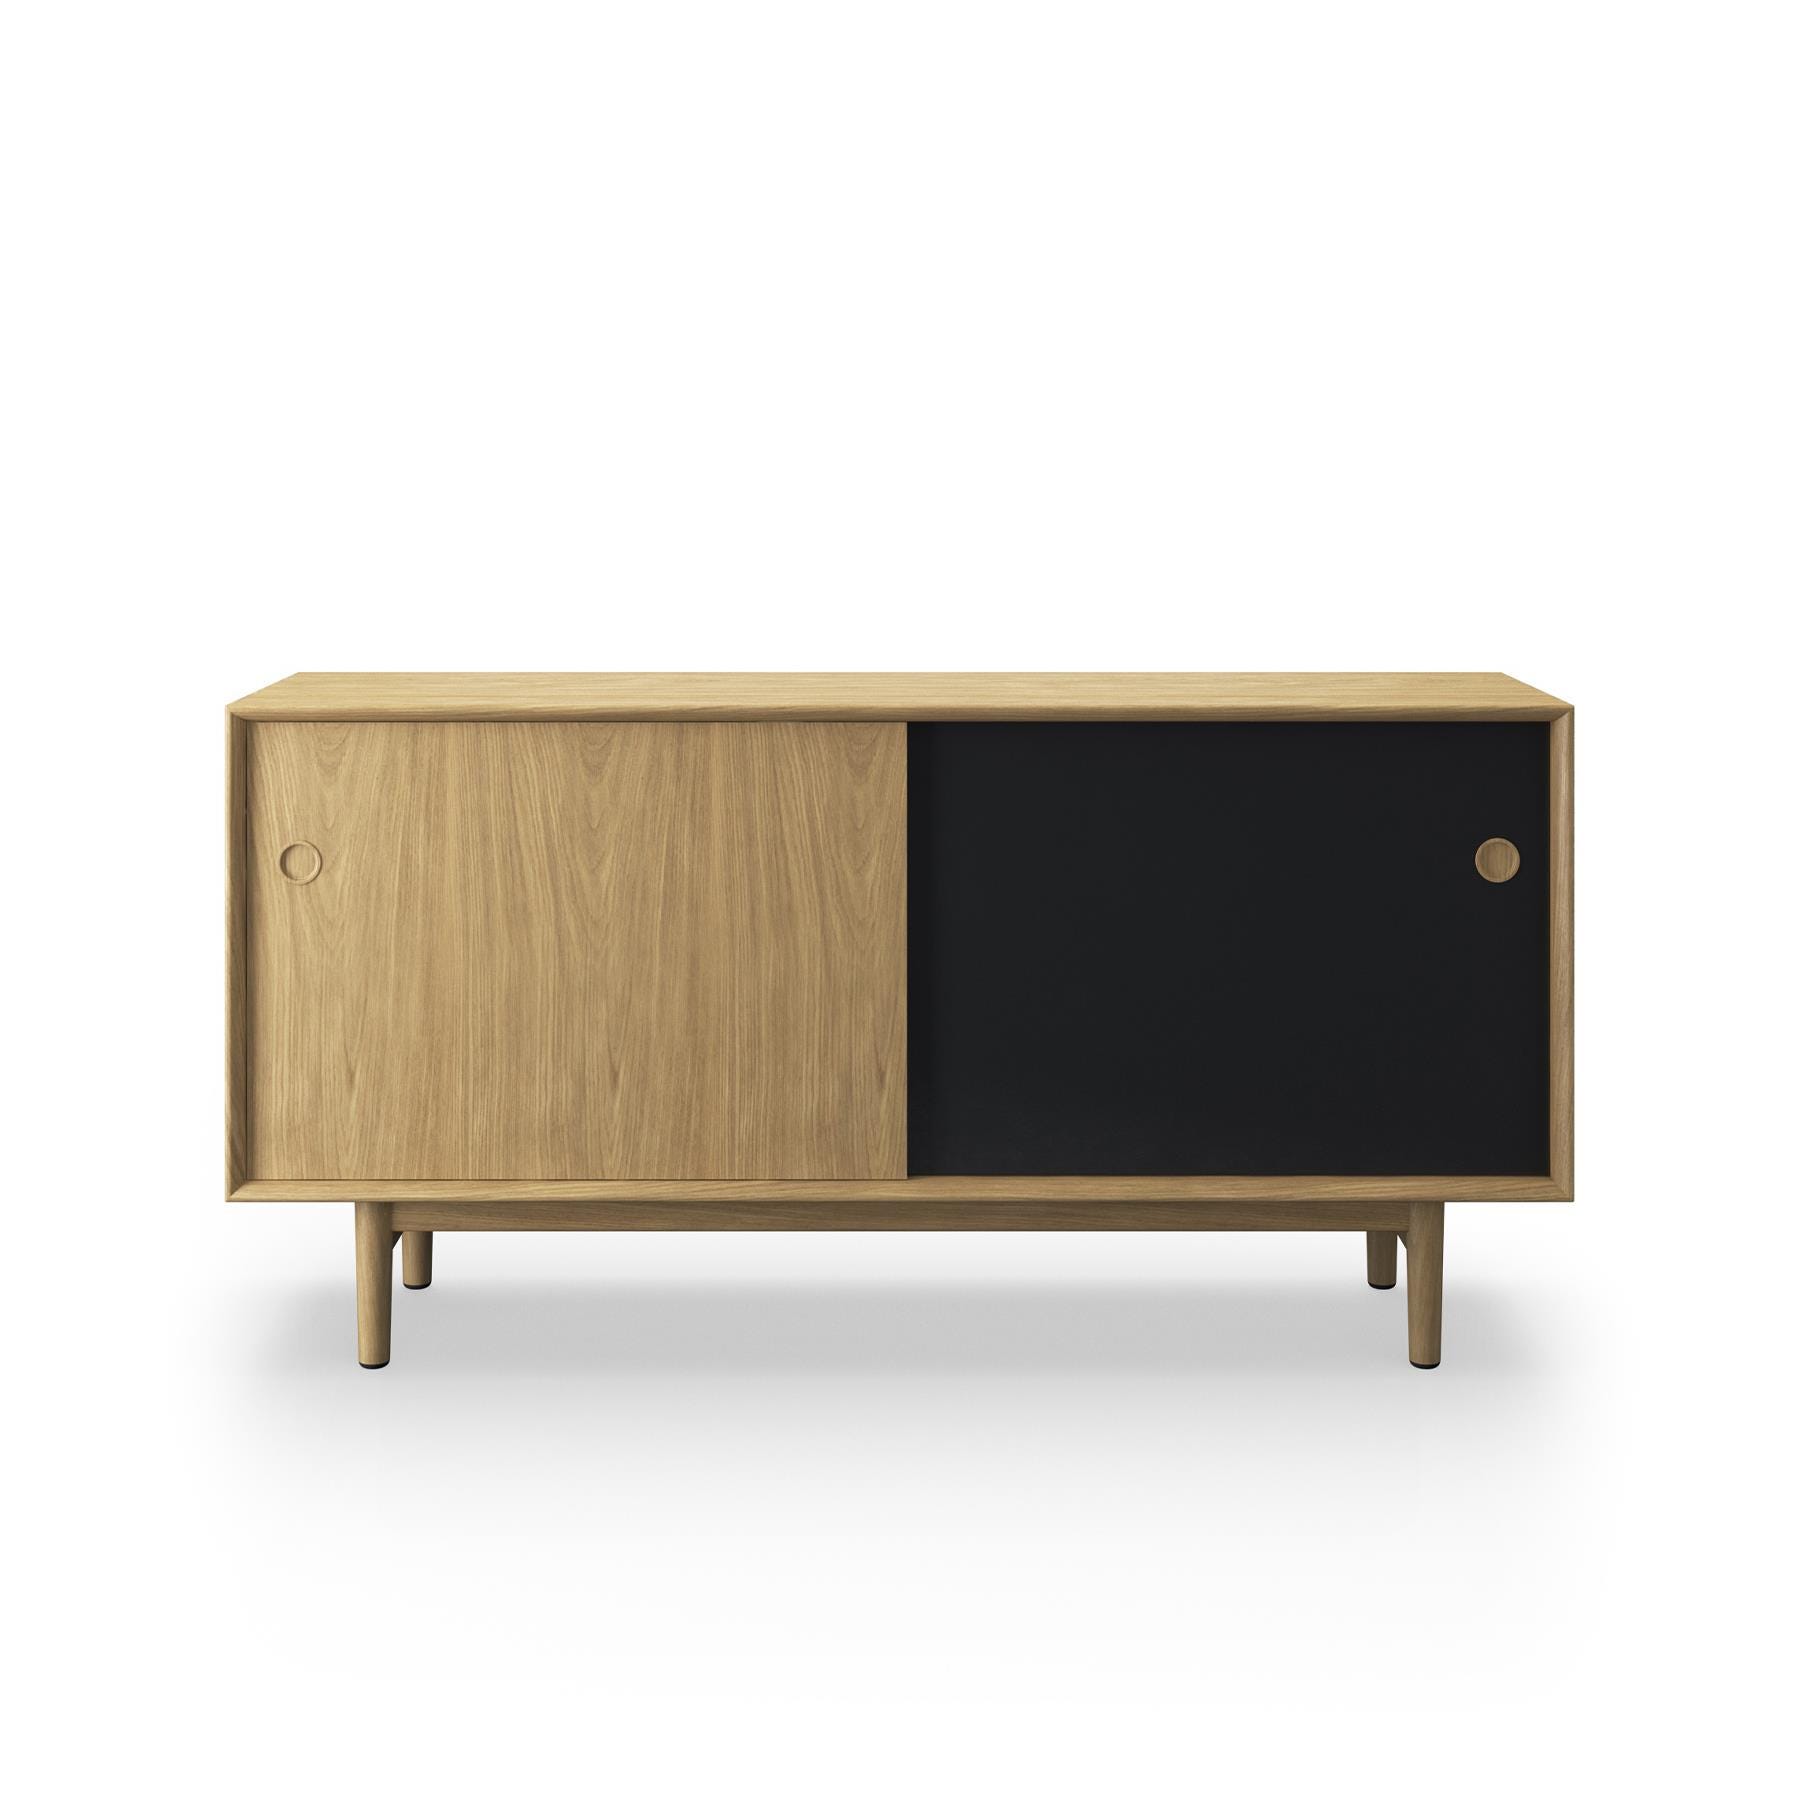 Sibast No 11 Sideboard White Oiled Oak Black And Natural Front Wooden Legs Light Wood Designer Furniture From Holloways Of Ludlow